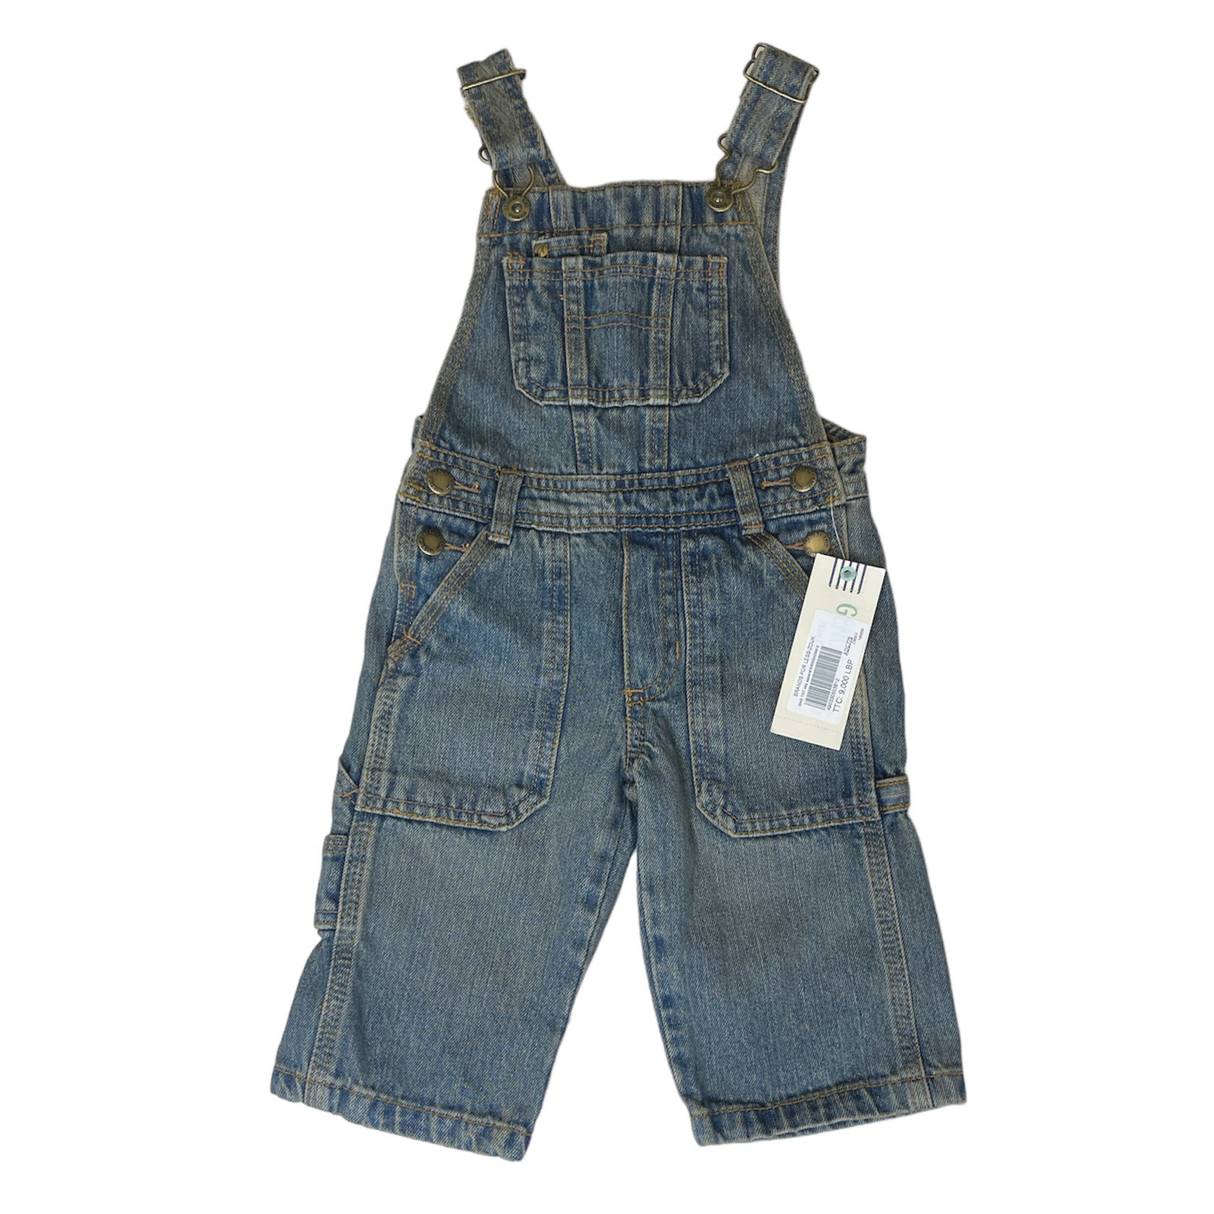 A Second Chance - Genuine Kids from Oshkosh 12 Month Overall Brand New